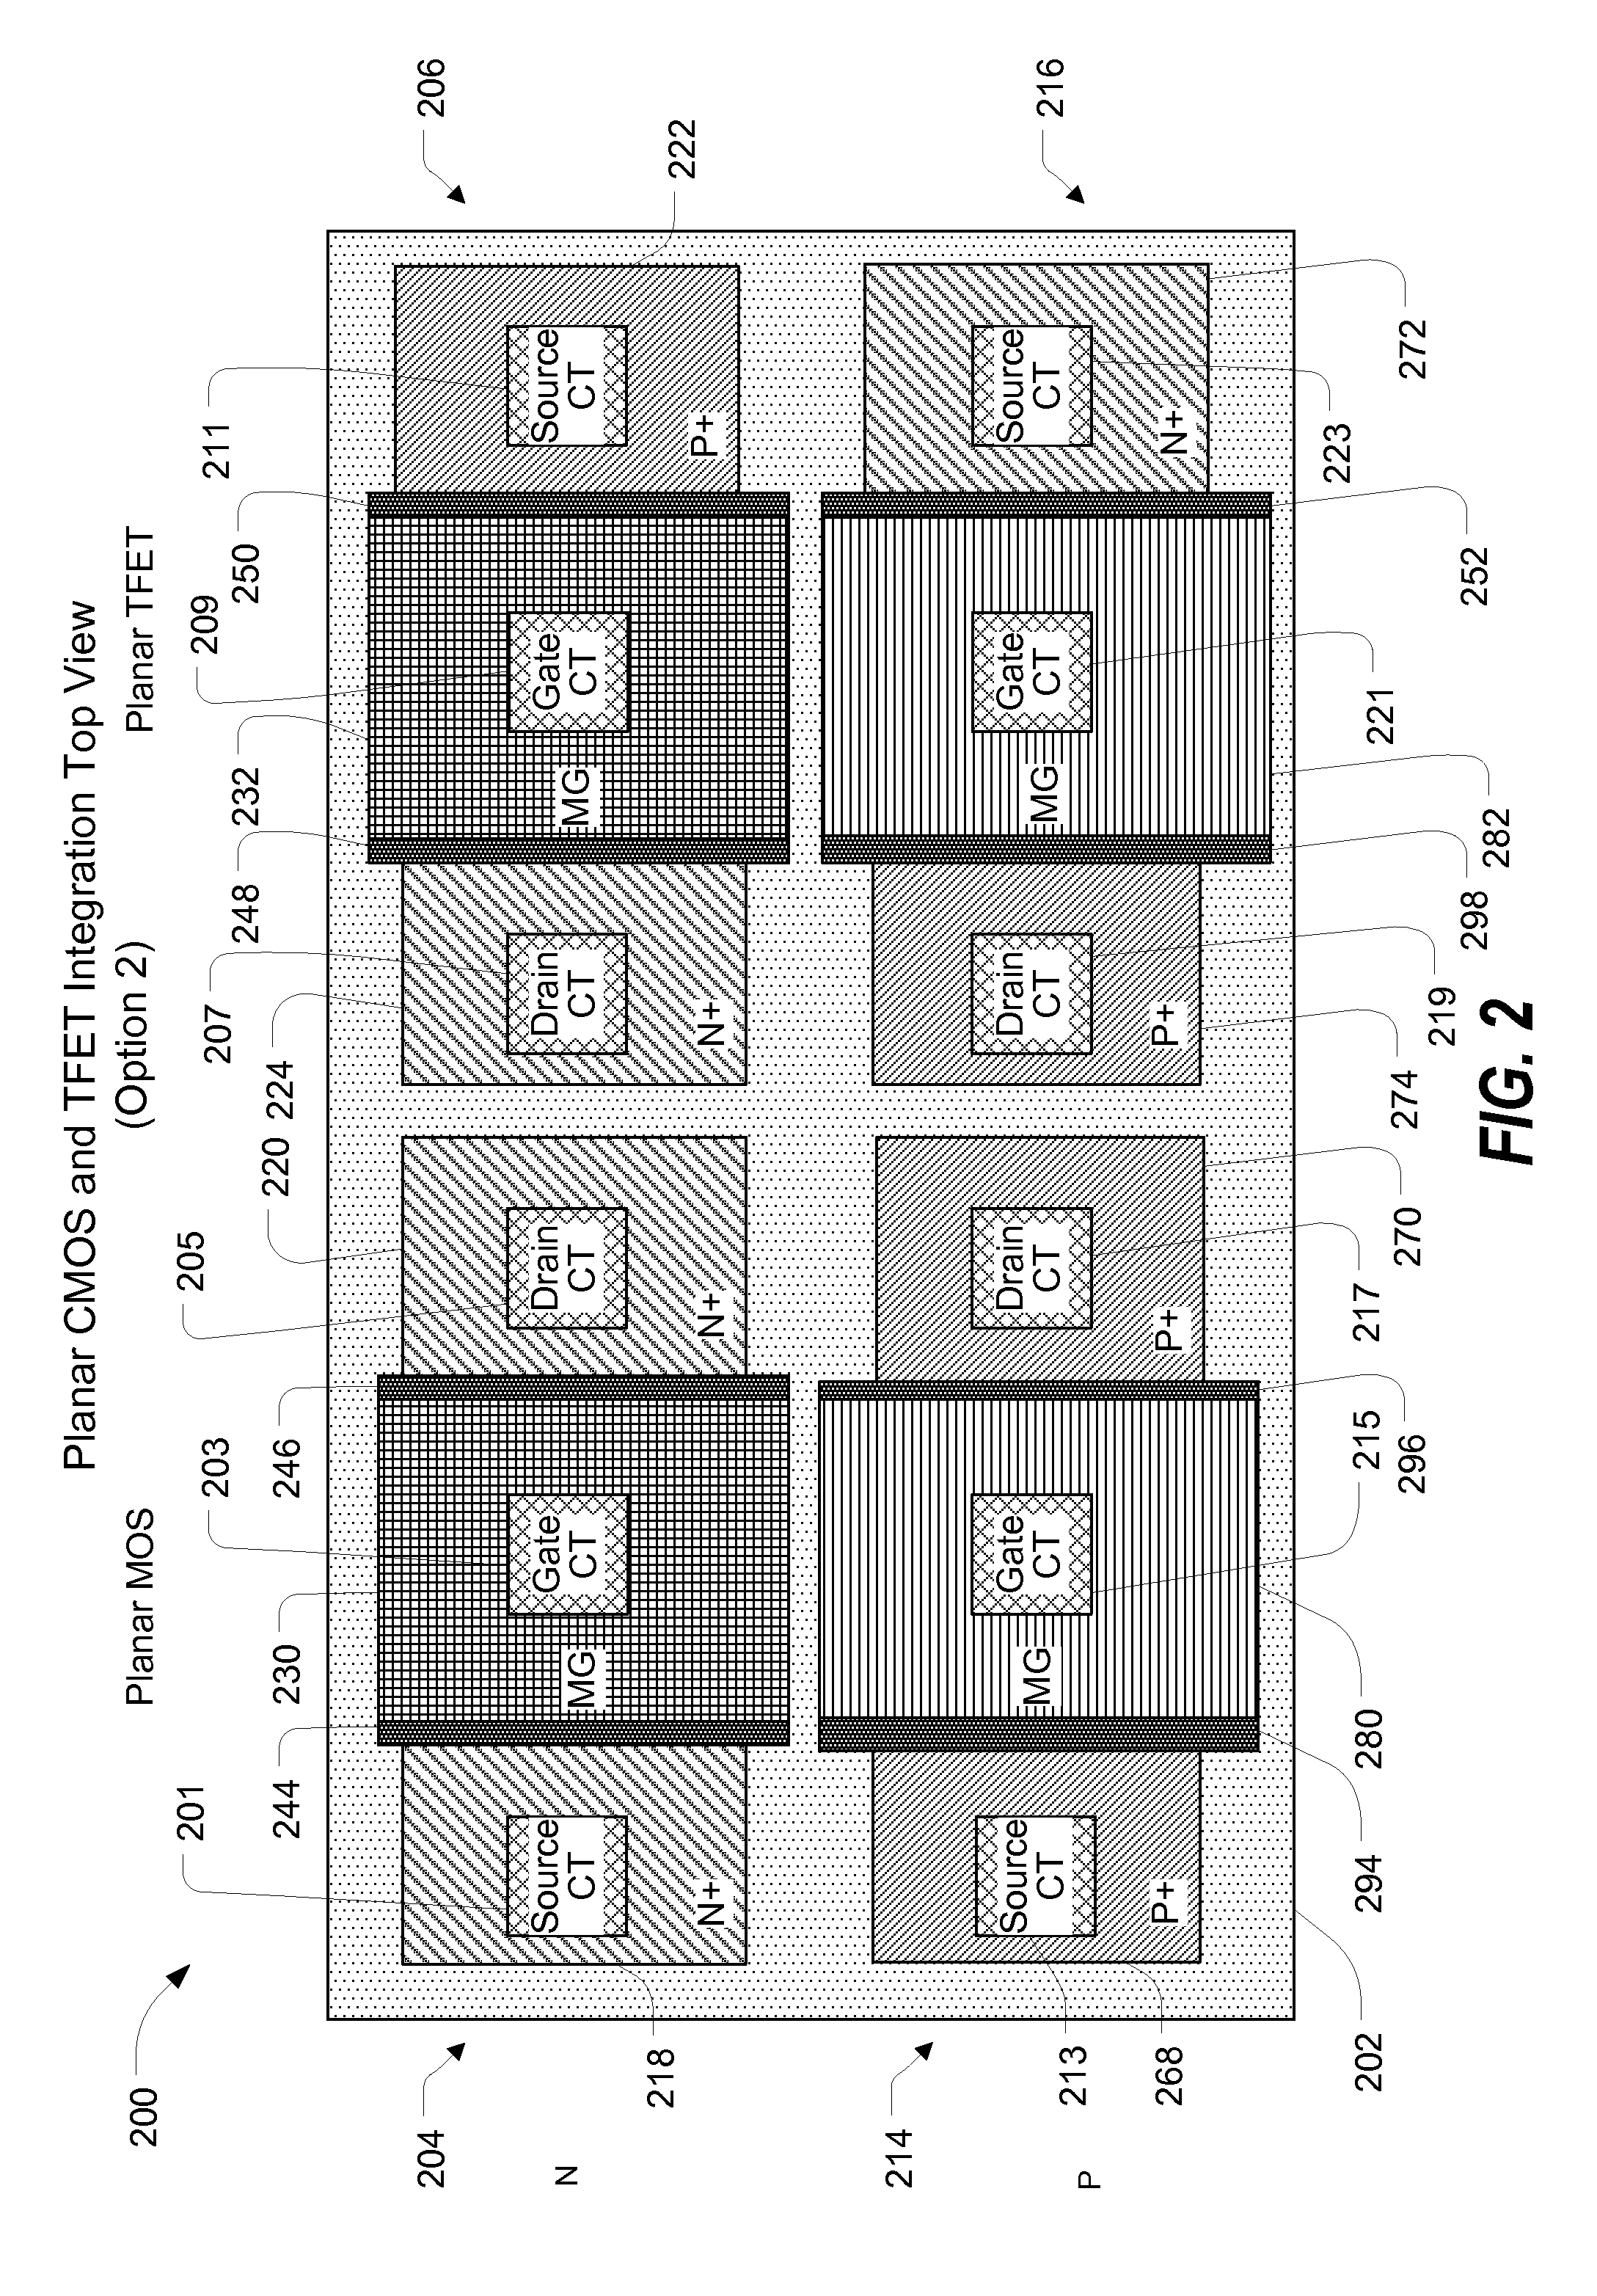 Complementary metal-oxide semiconductor (CMOS) transistor and tunnel field-effect transistor (TFET) on a single substrate